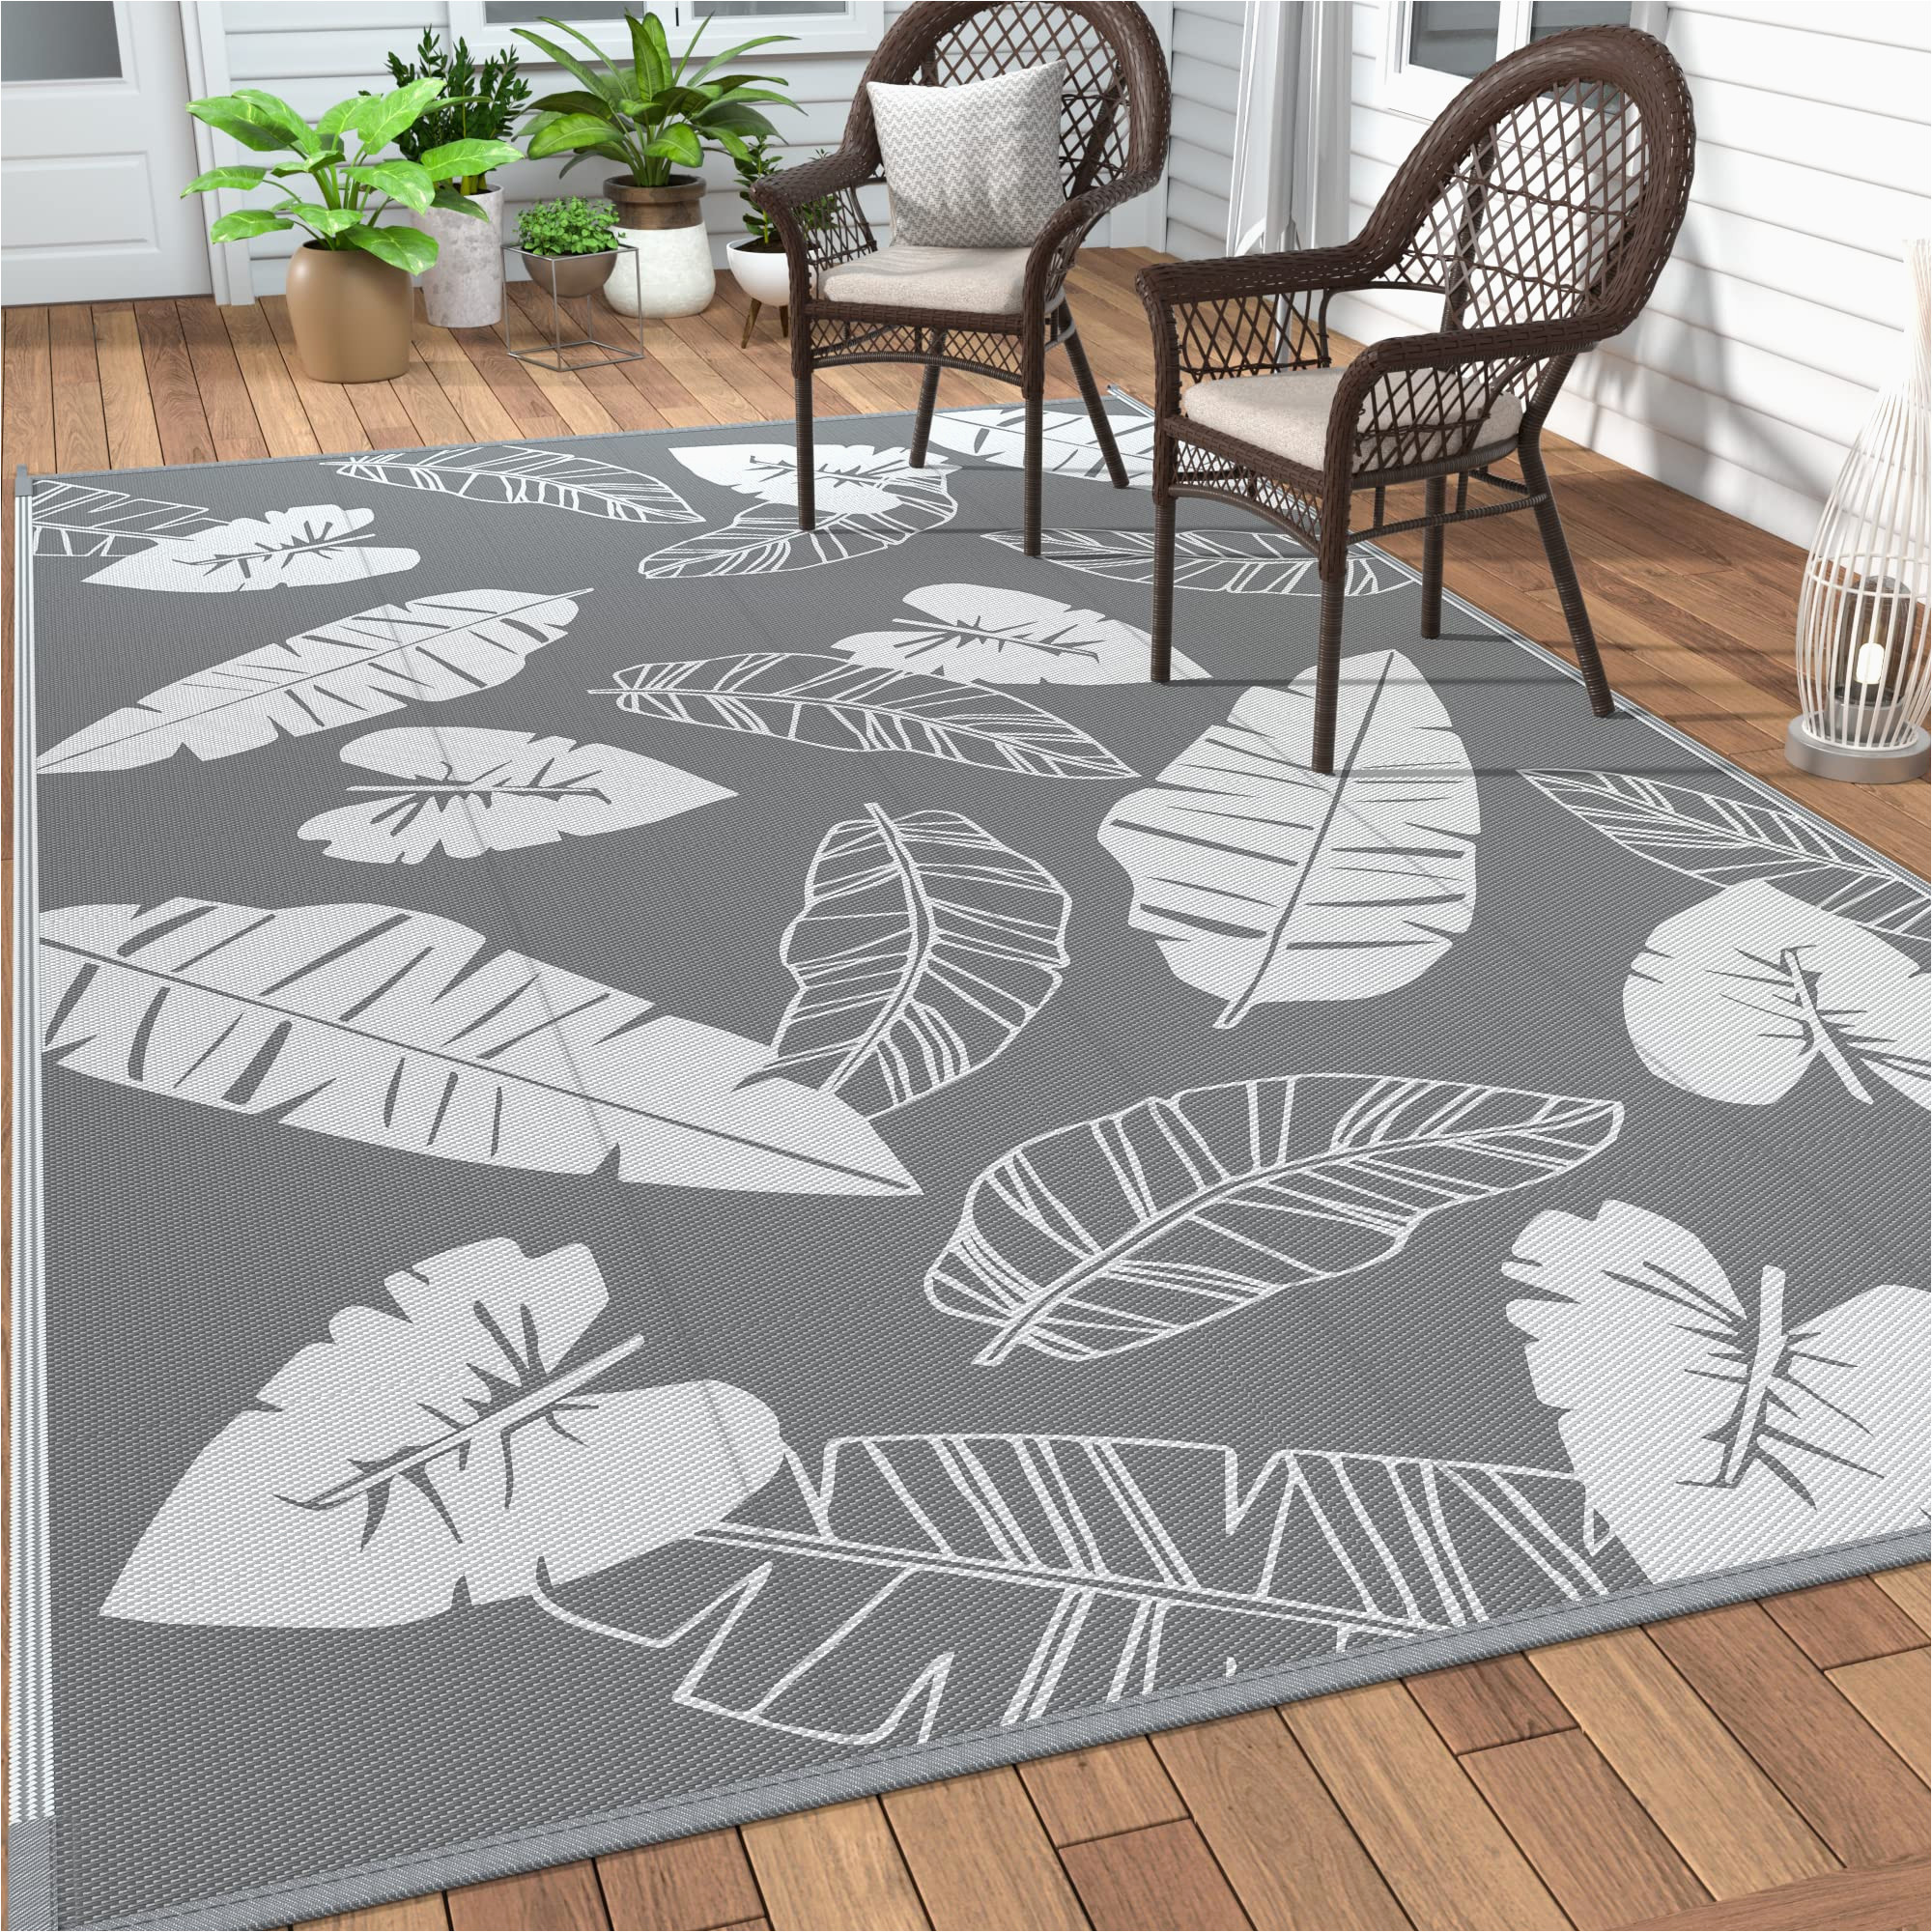 Indoor Outdoor area Rugs 9 X 12 Genimo Outdoor Rugs 9’x12′ for Patios Clearance, Reversible Tropical Outdoor Decor area Rugs, Plastic Straw Waterproof Carpet, Camping Mat, Rv, Porch, …